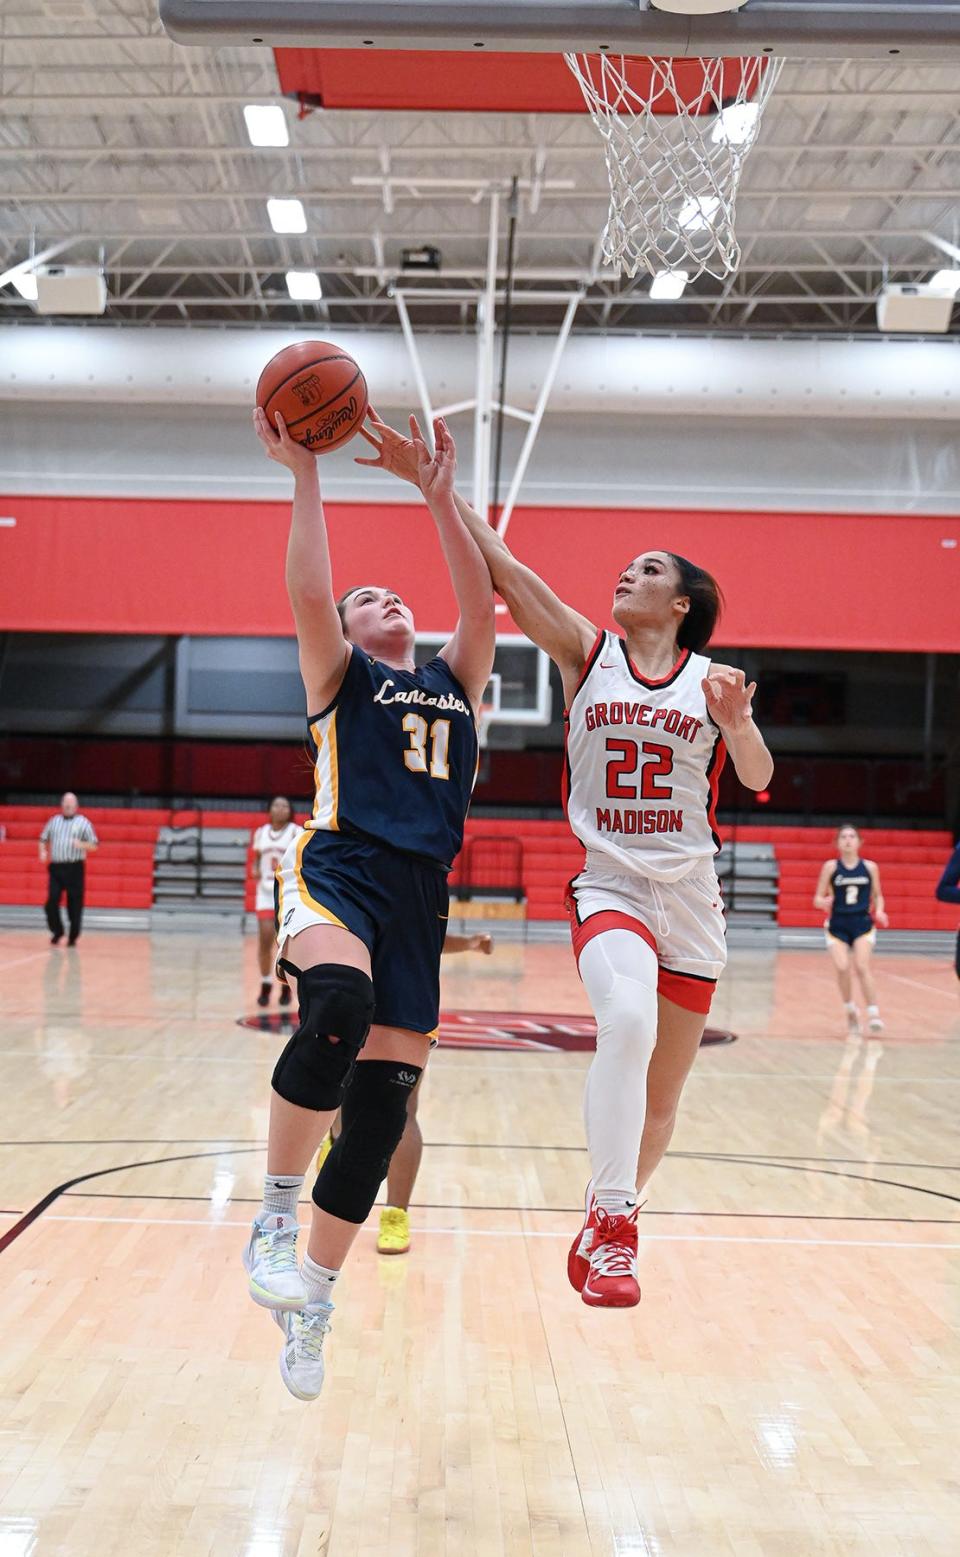 Lancaster's Peyton Wilson shoots a lay up Friday night at Groveport Madison High School. The Lady Gales lost 65-64 in overtime.